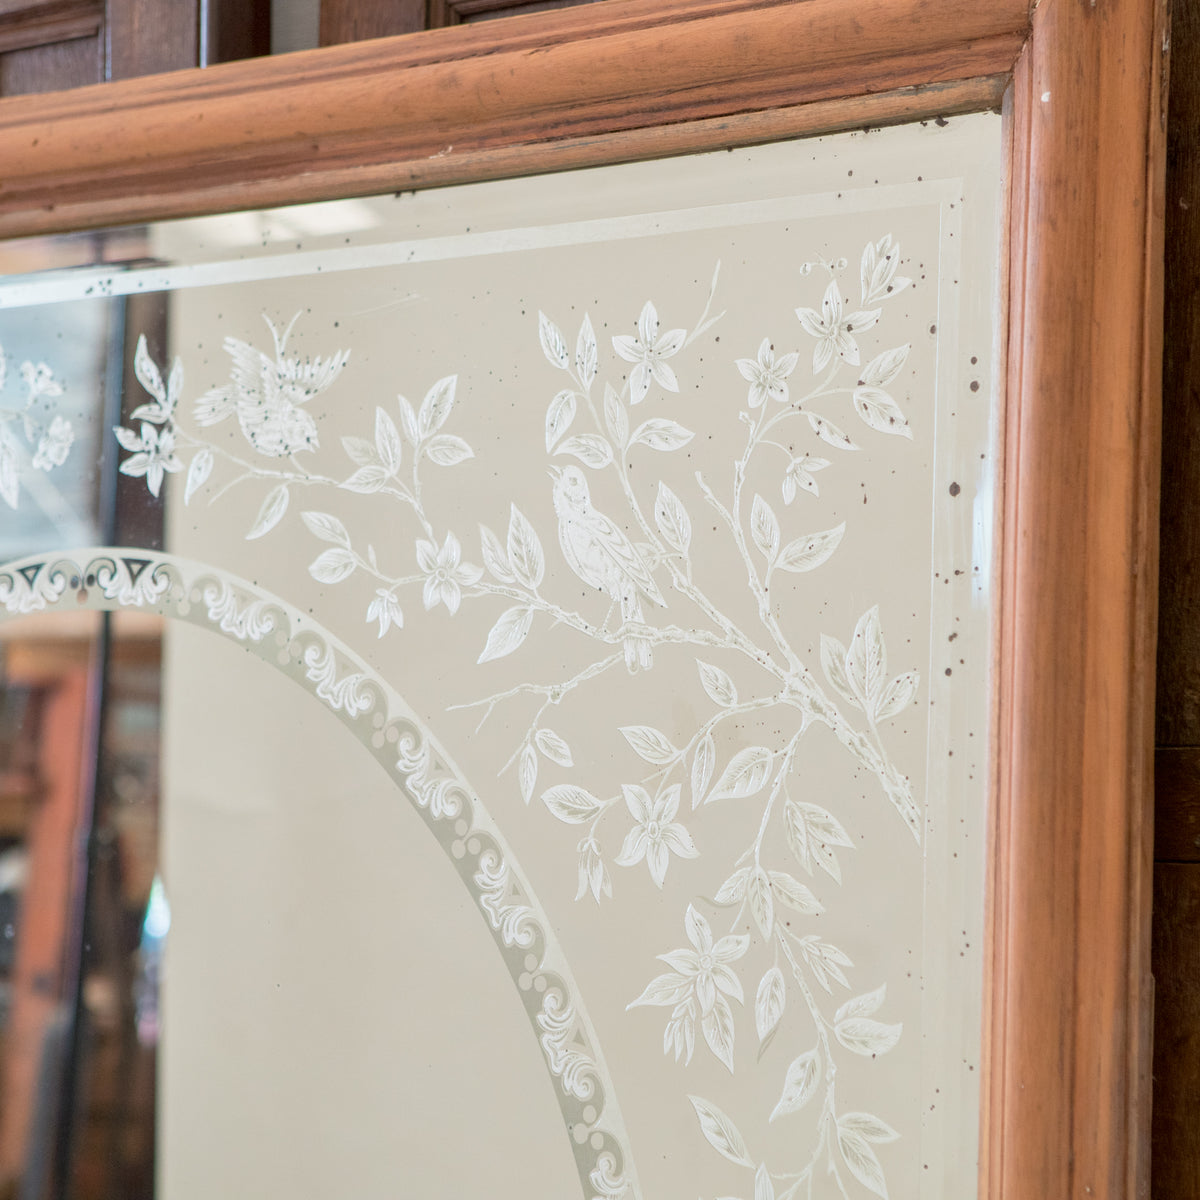 Large Antique Victorian Etched Mirror with Wooden Frame | The Architectural Forum